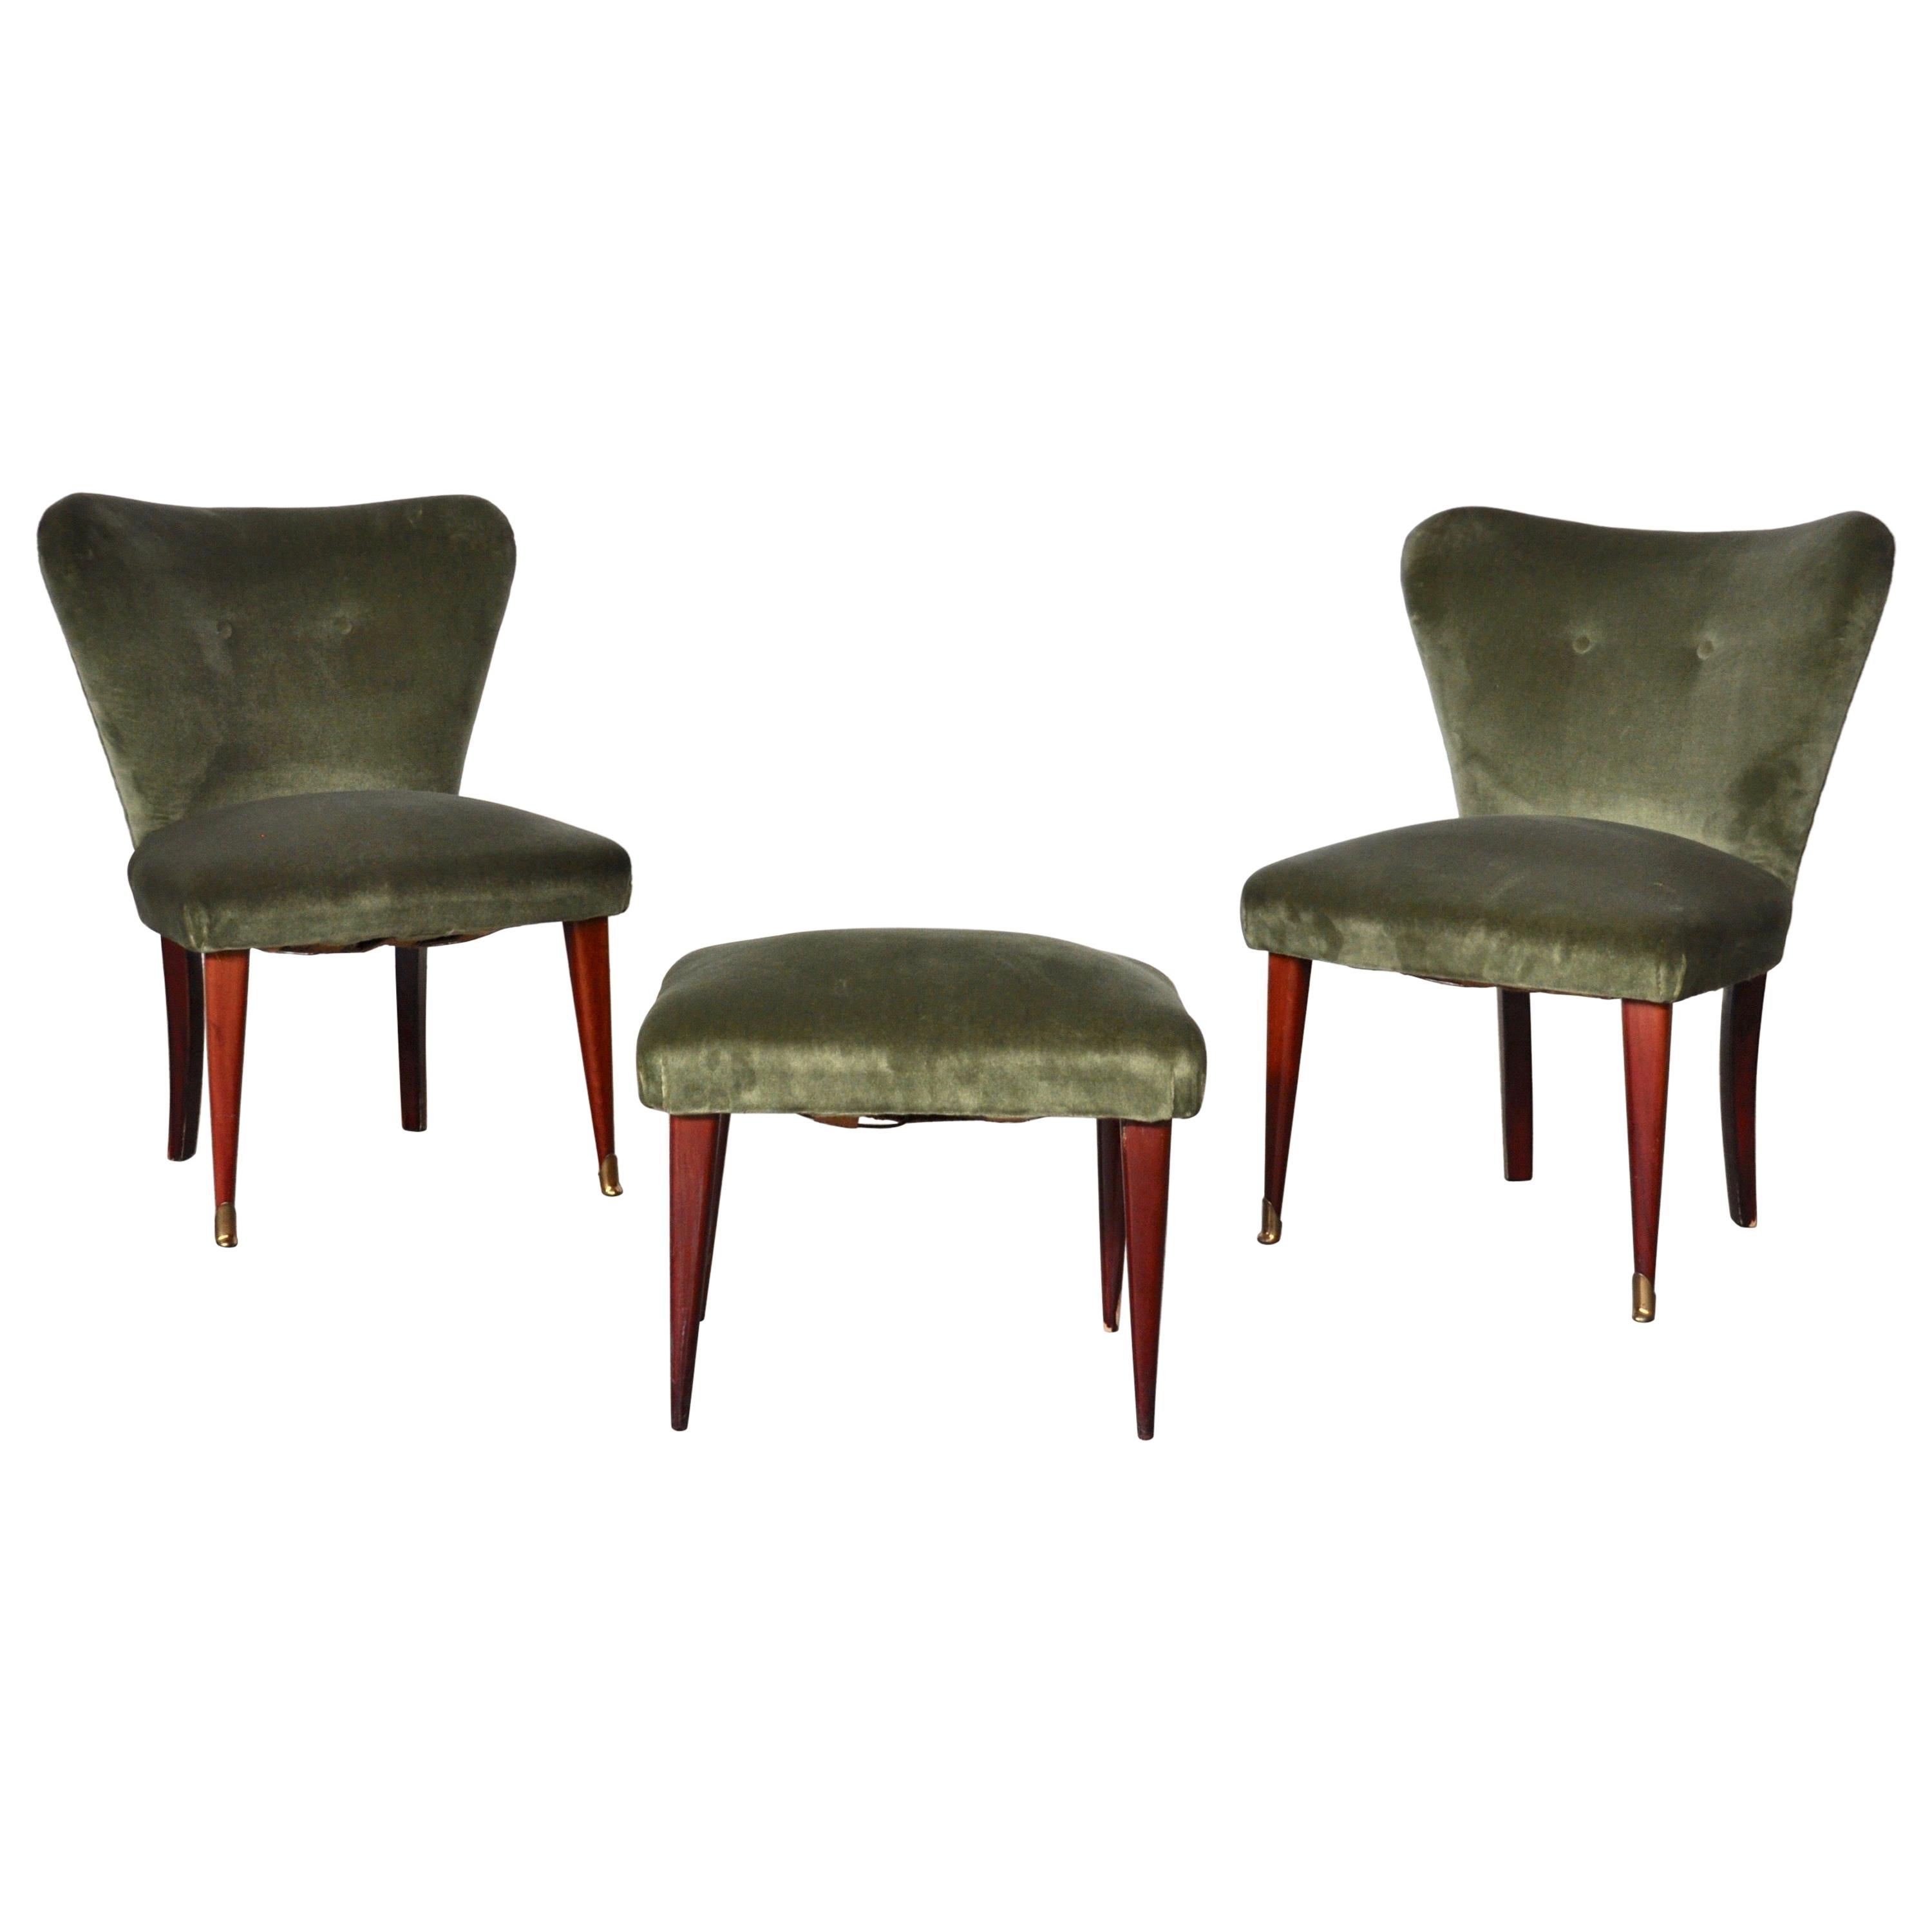 Set Seats and Footstool in Mahogany Wood, Velvet, Brass Dectails, Italy, 1950s For Sale